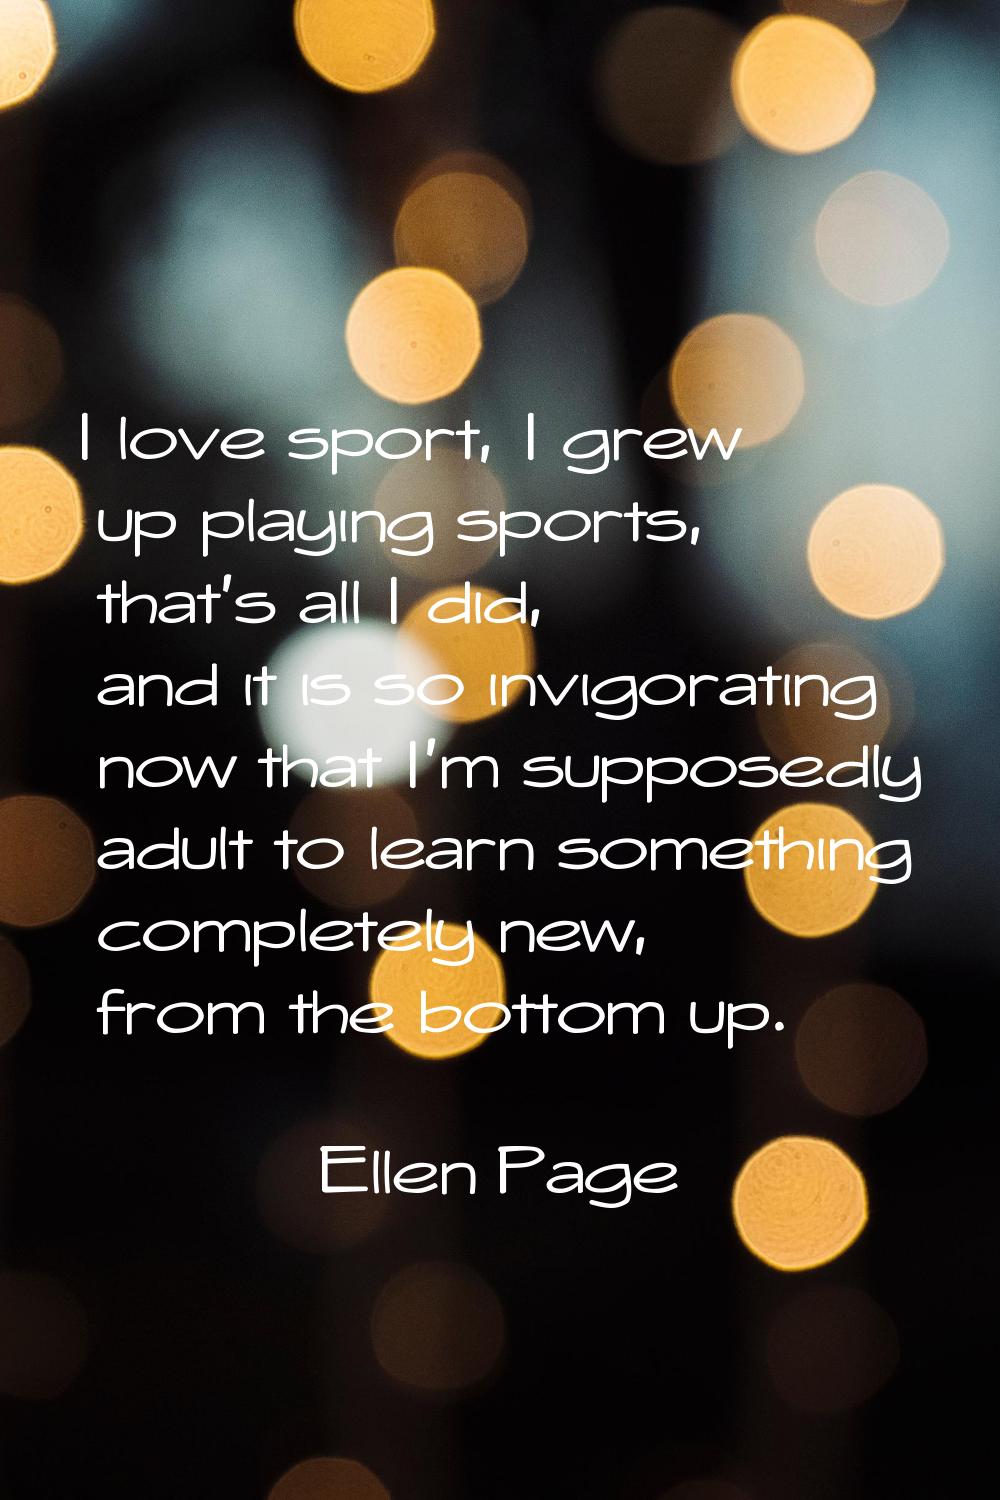 I love sport, I grew up playing sports, that's all I did, and it is so invigorating now that I'm su